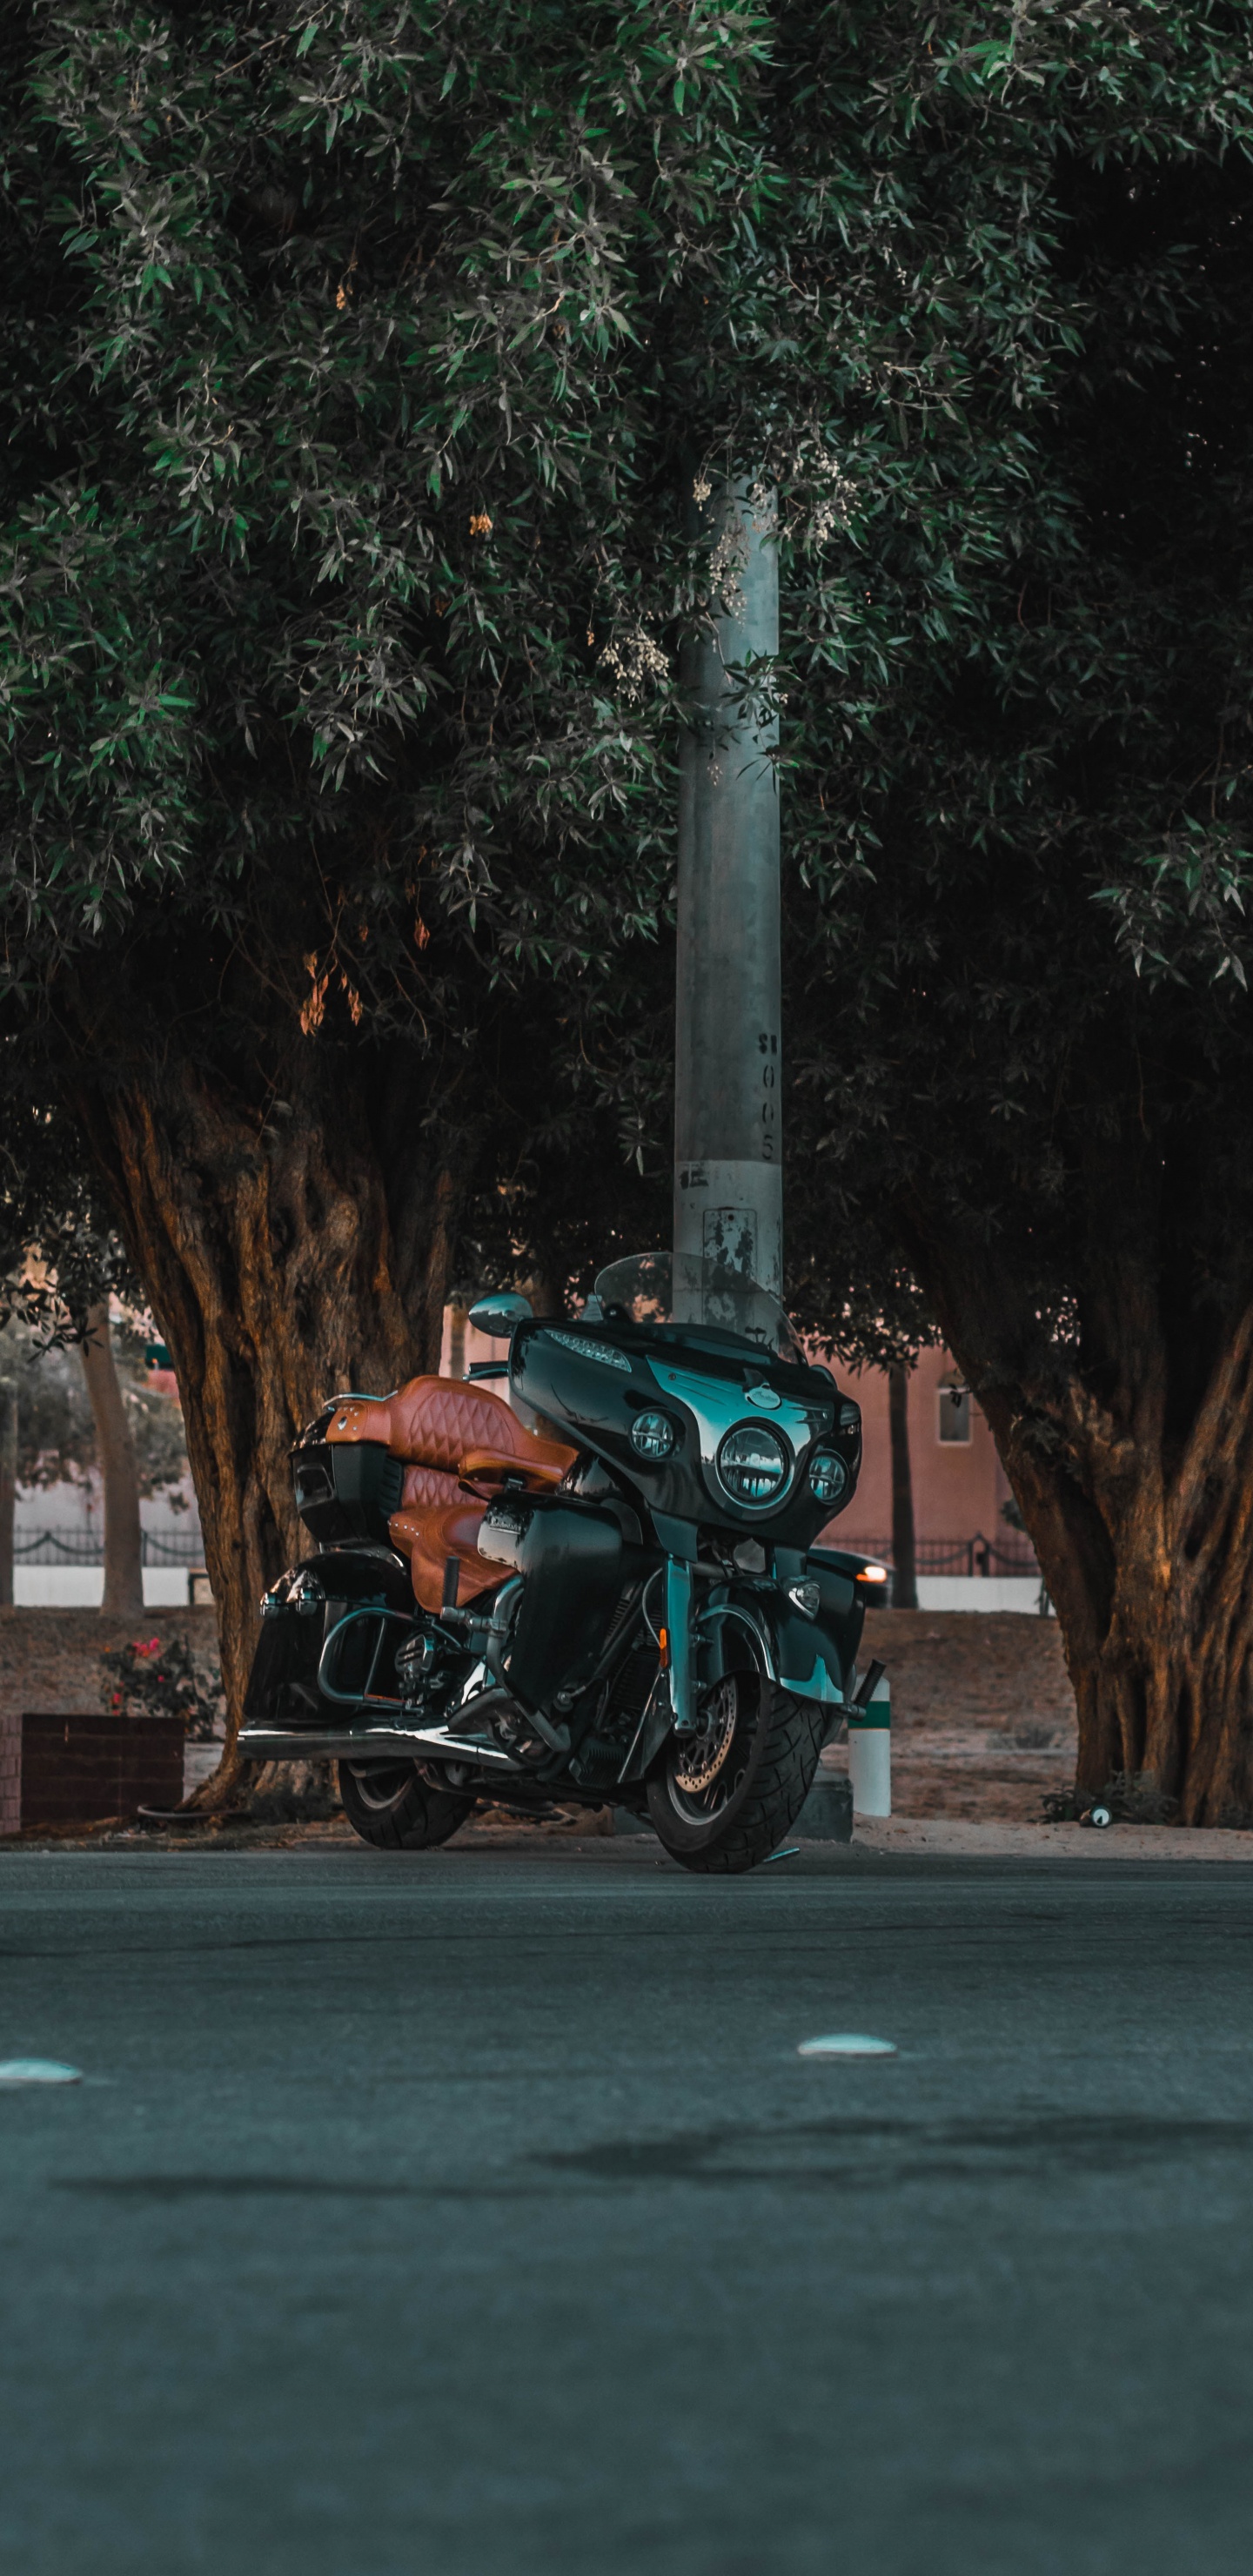 Green and Black Motorcycle Parked on Gray Concrete Road During Daytime. Wallpaper in 1440x2960 Resolution